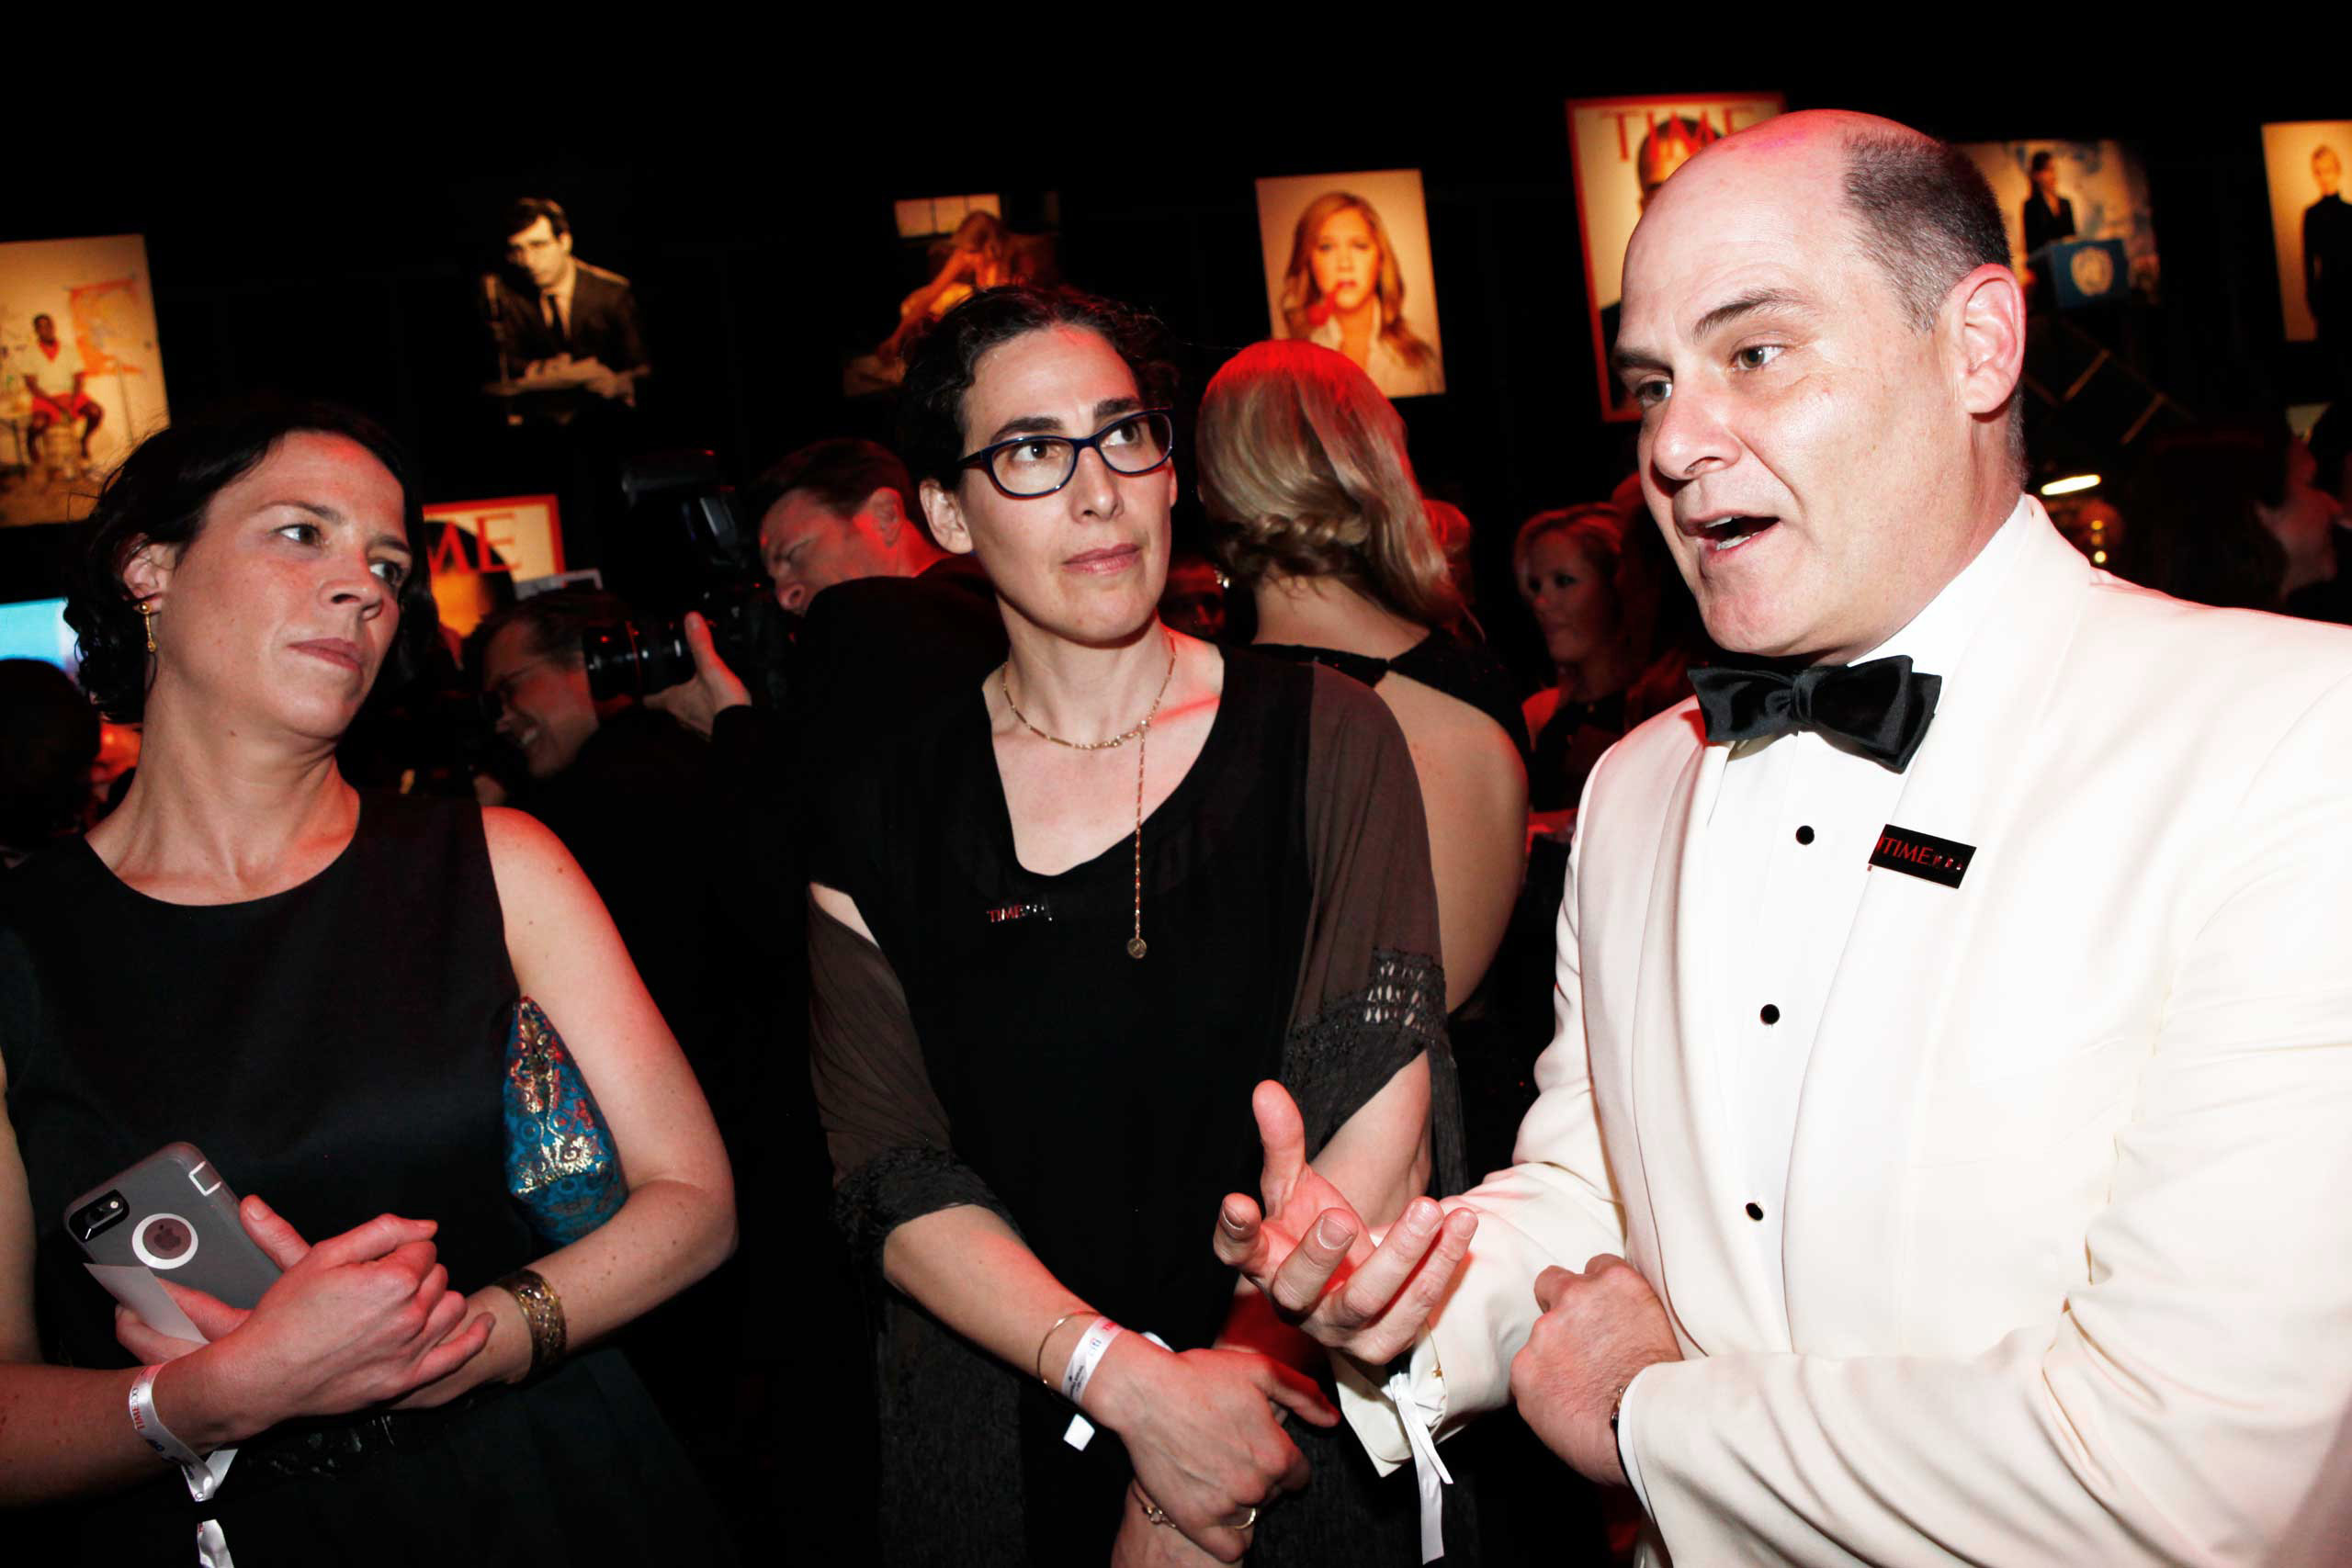 Julie Snyder, Sarah Koenig and Matthew Weiner attend the TIME 100 Gala at Lincoln Center in New York, NY, on Apr. 21, 2015. (Andrew Hinderaker for TIME)